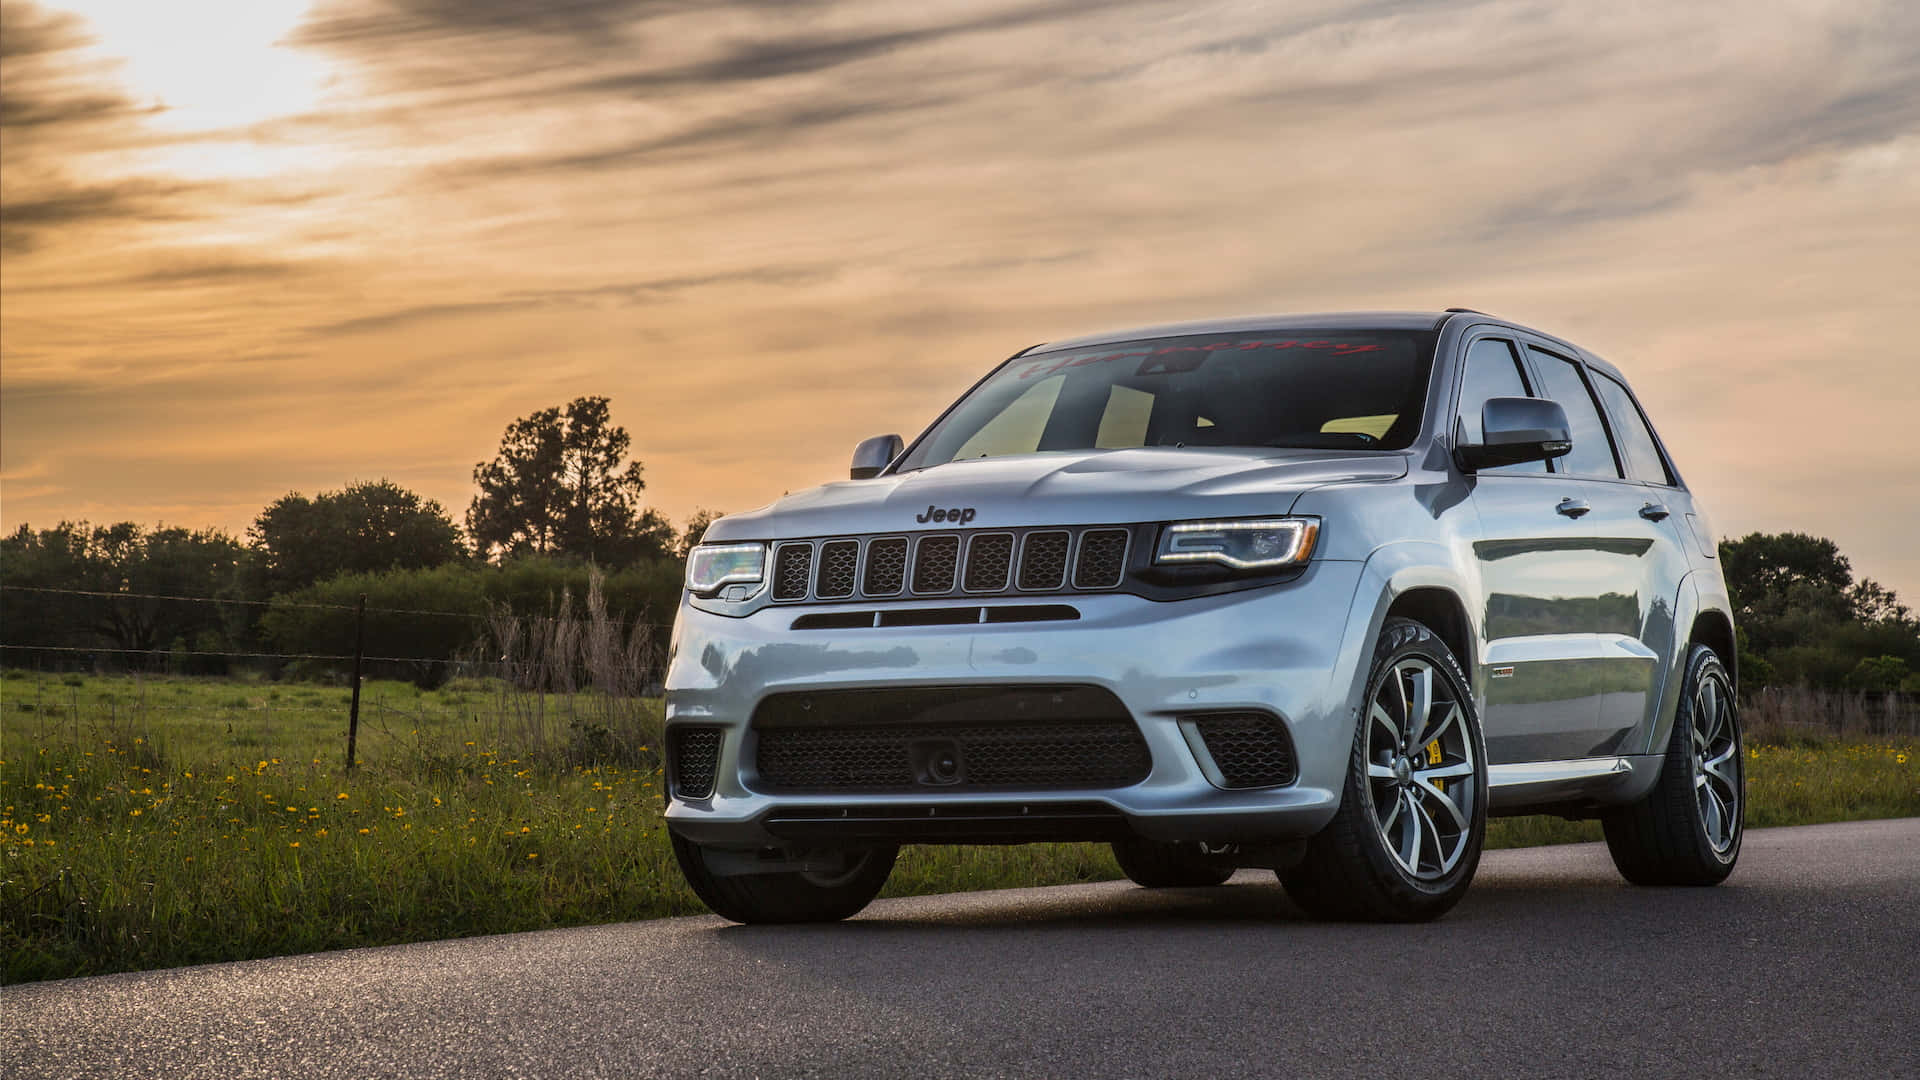 The 2019 Jeep Grand Cherokee Is Driving Down A Country Road Wallpaper